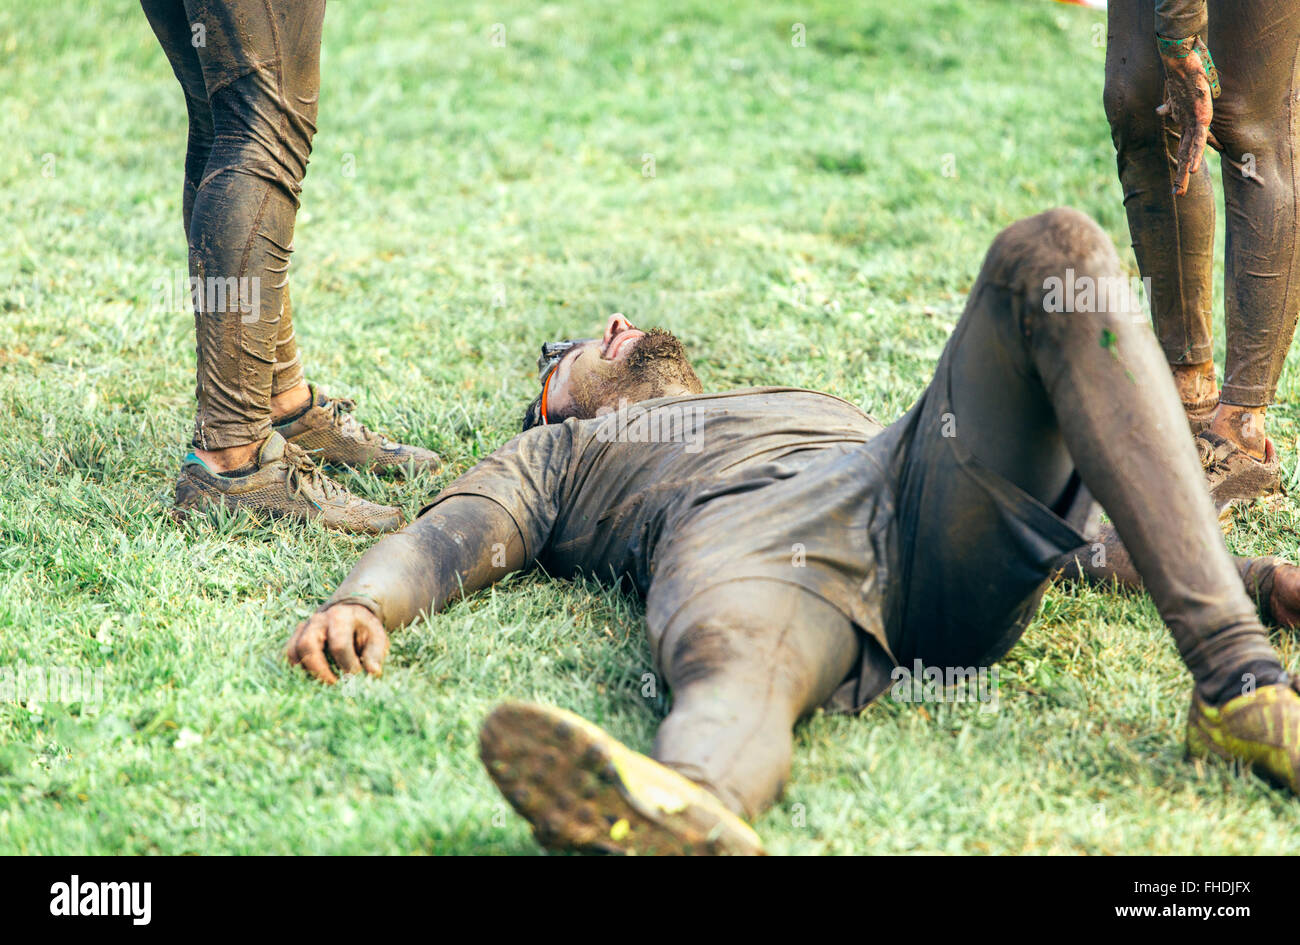 Participant in extreme obstacle race lying exhaustedly on grass Stock Photo